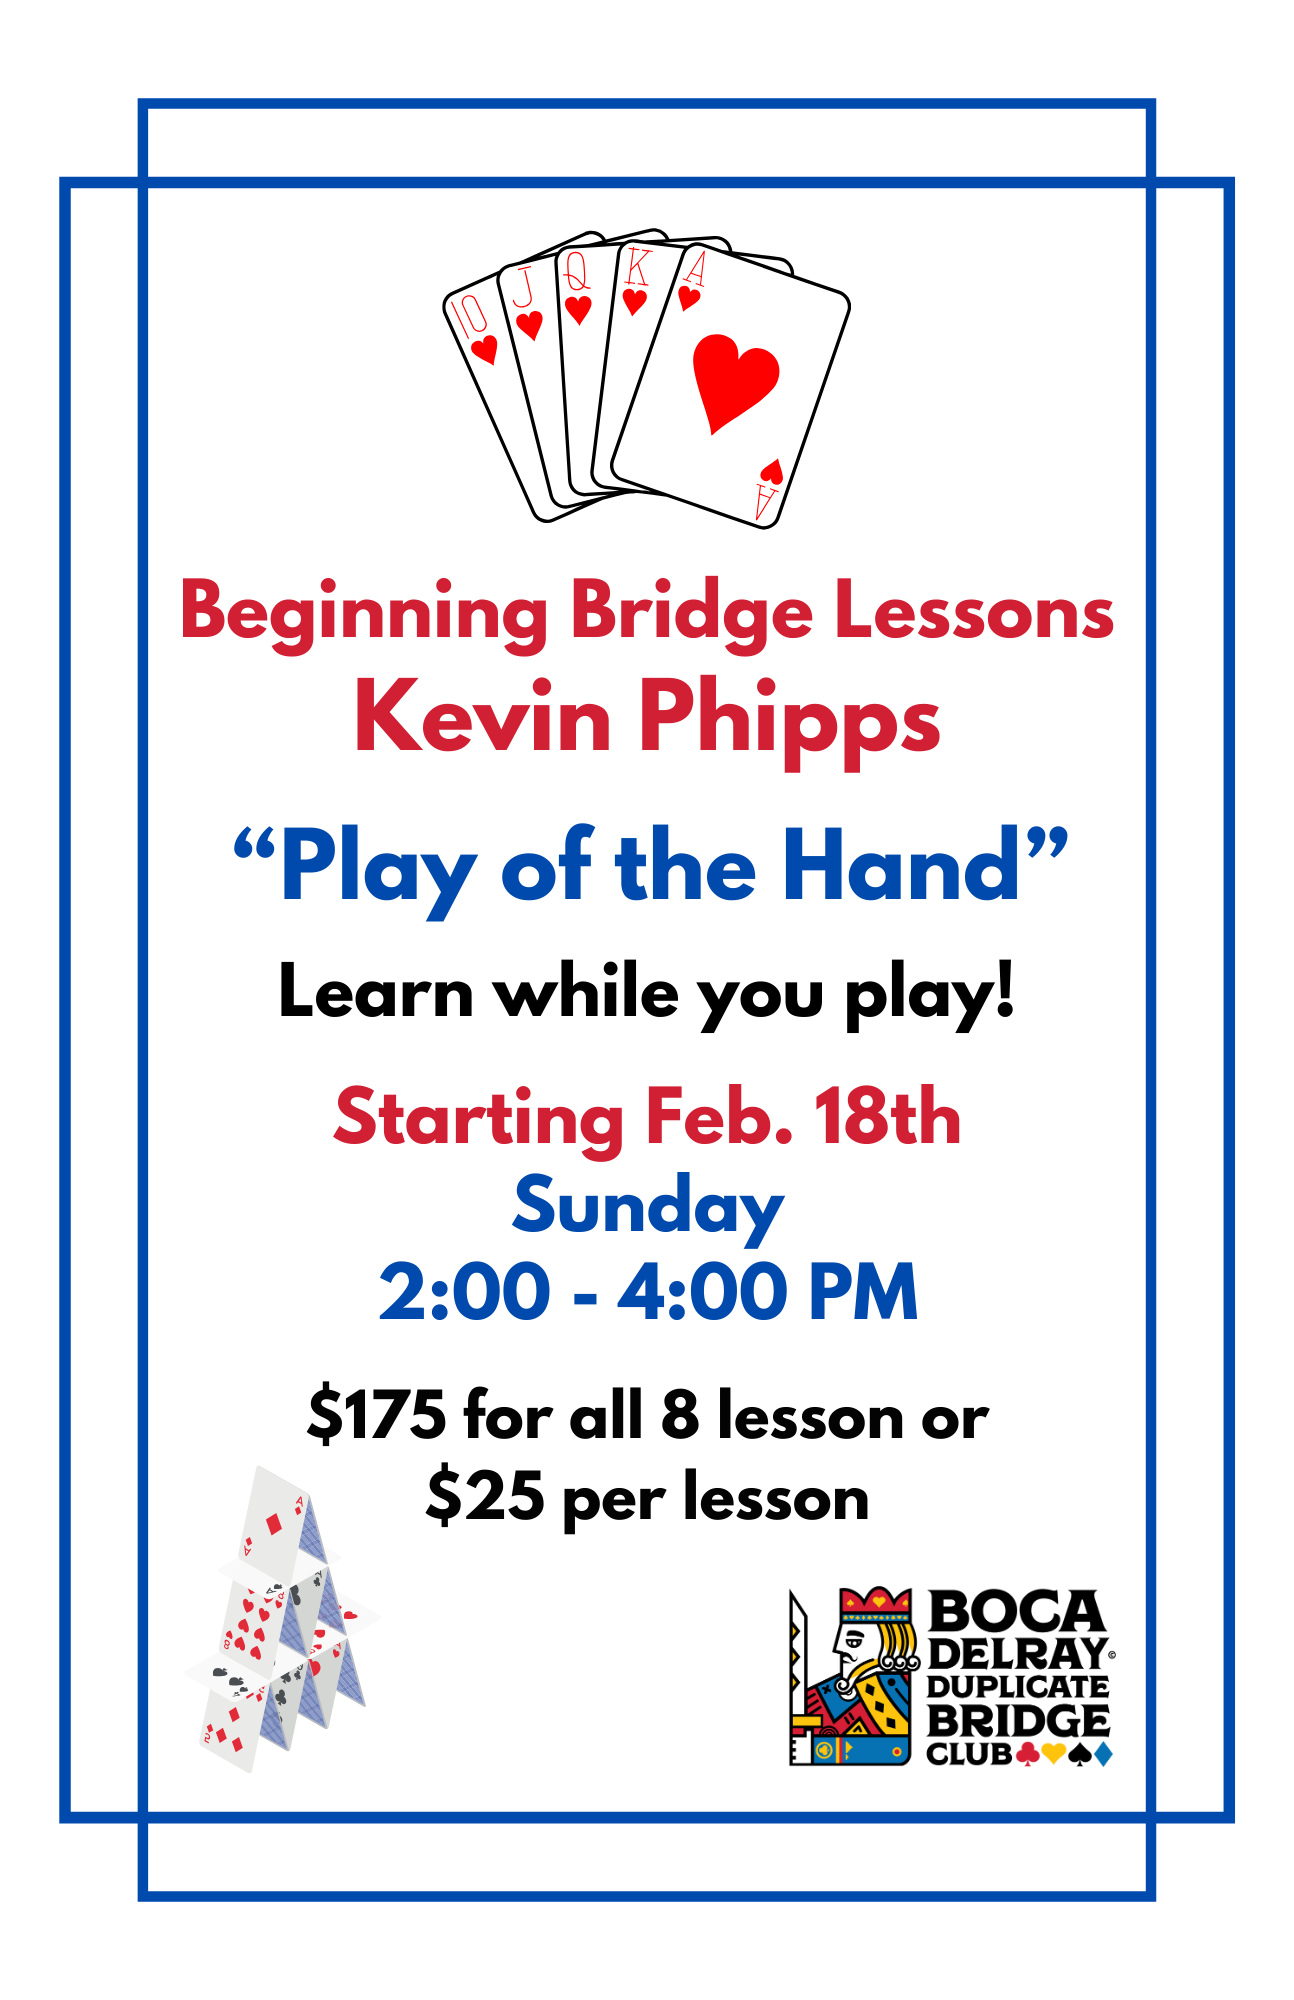 Beginners Bridge Lessons with Kevin Phipps